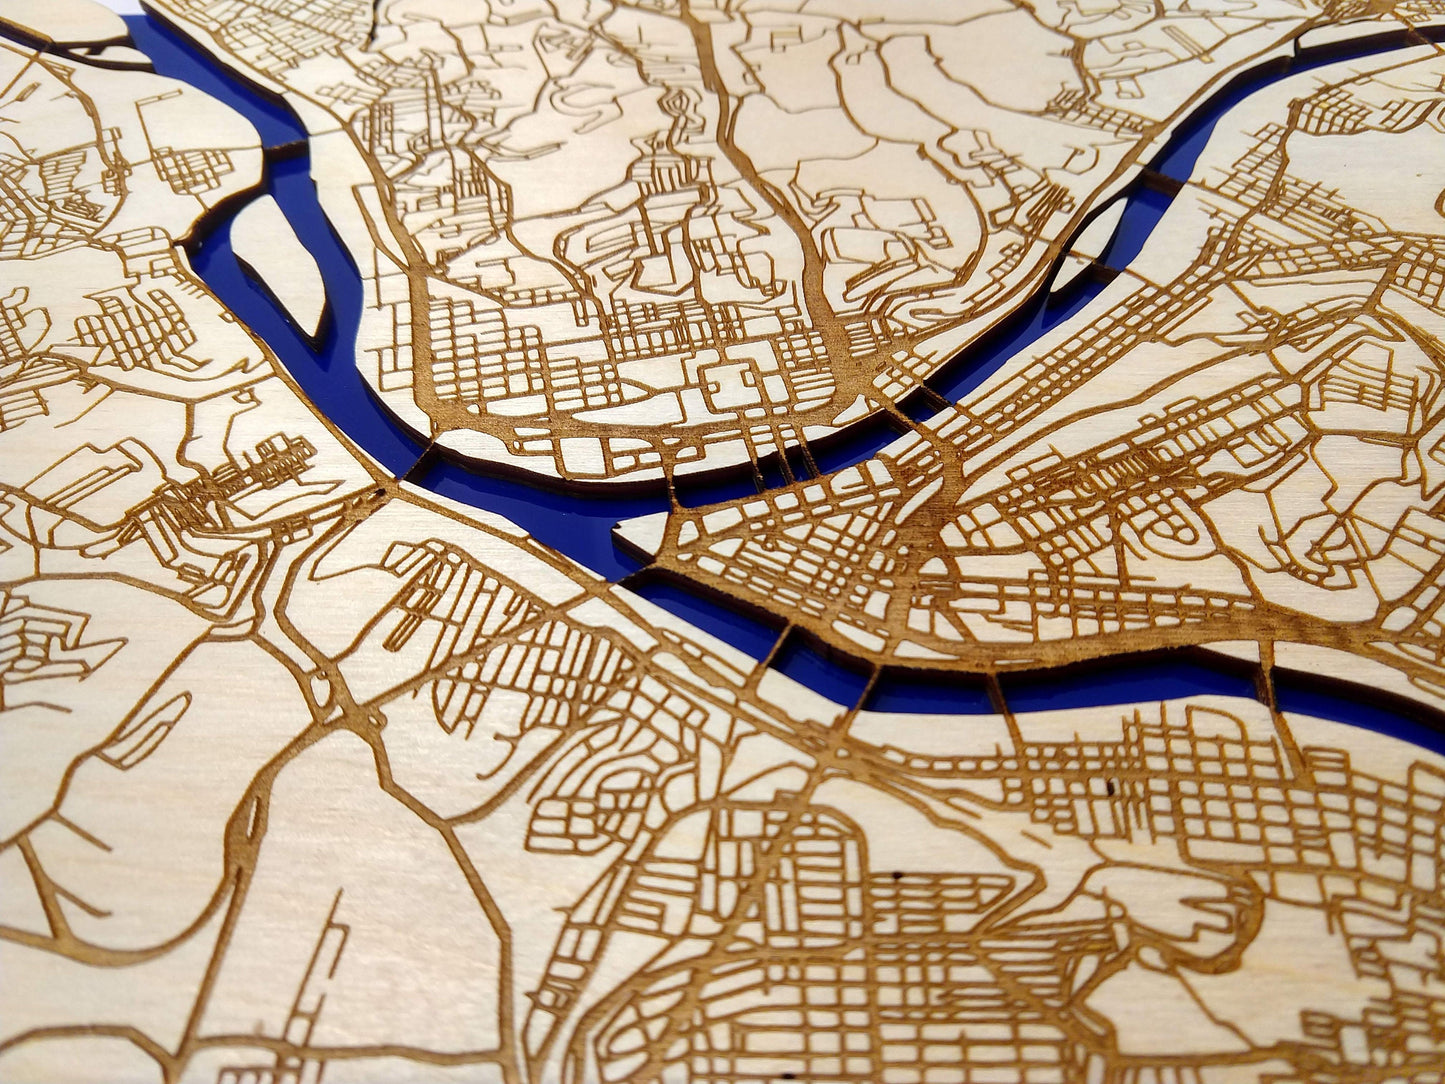 Pittsburgh Pennsvylania 3D Wooden Map